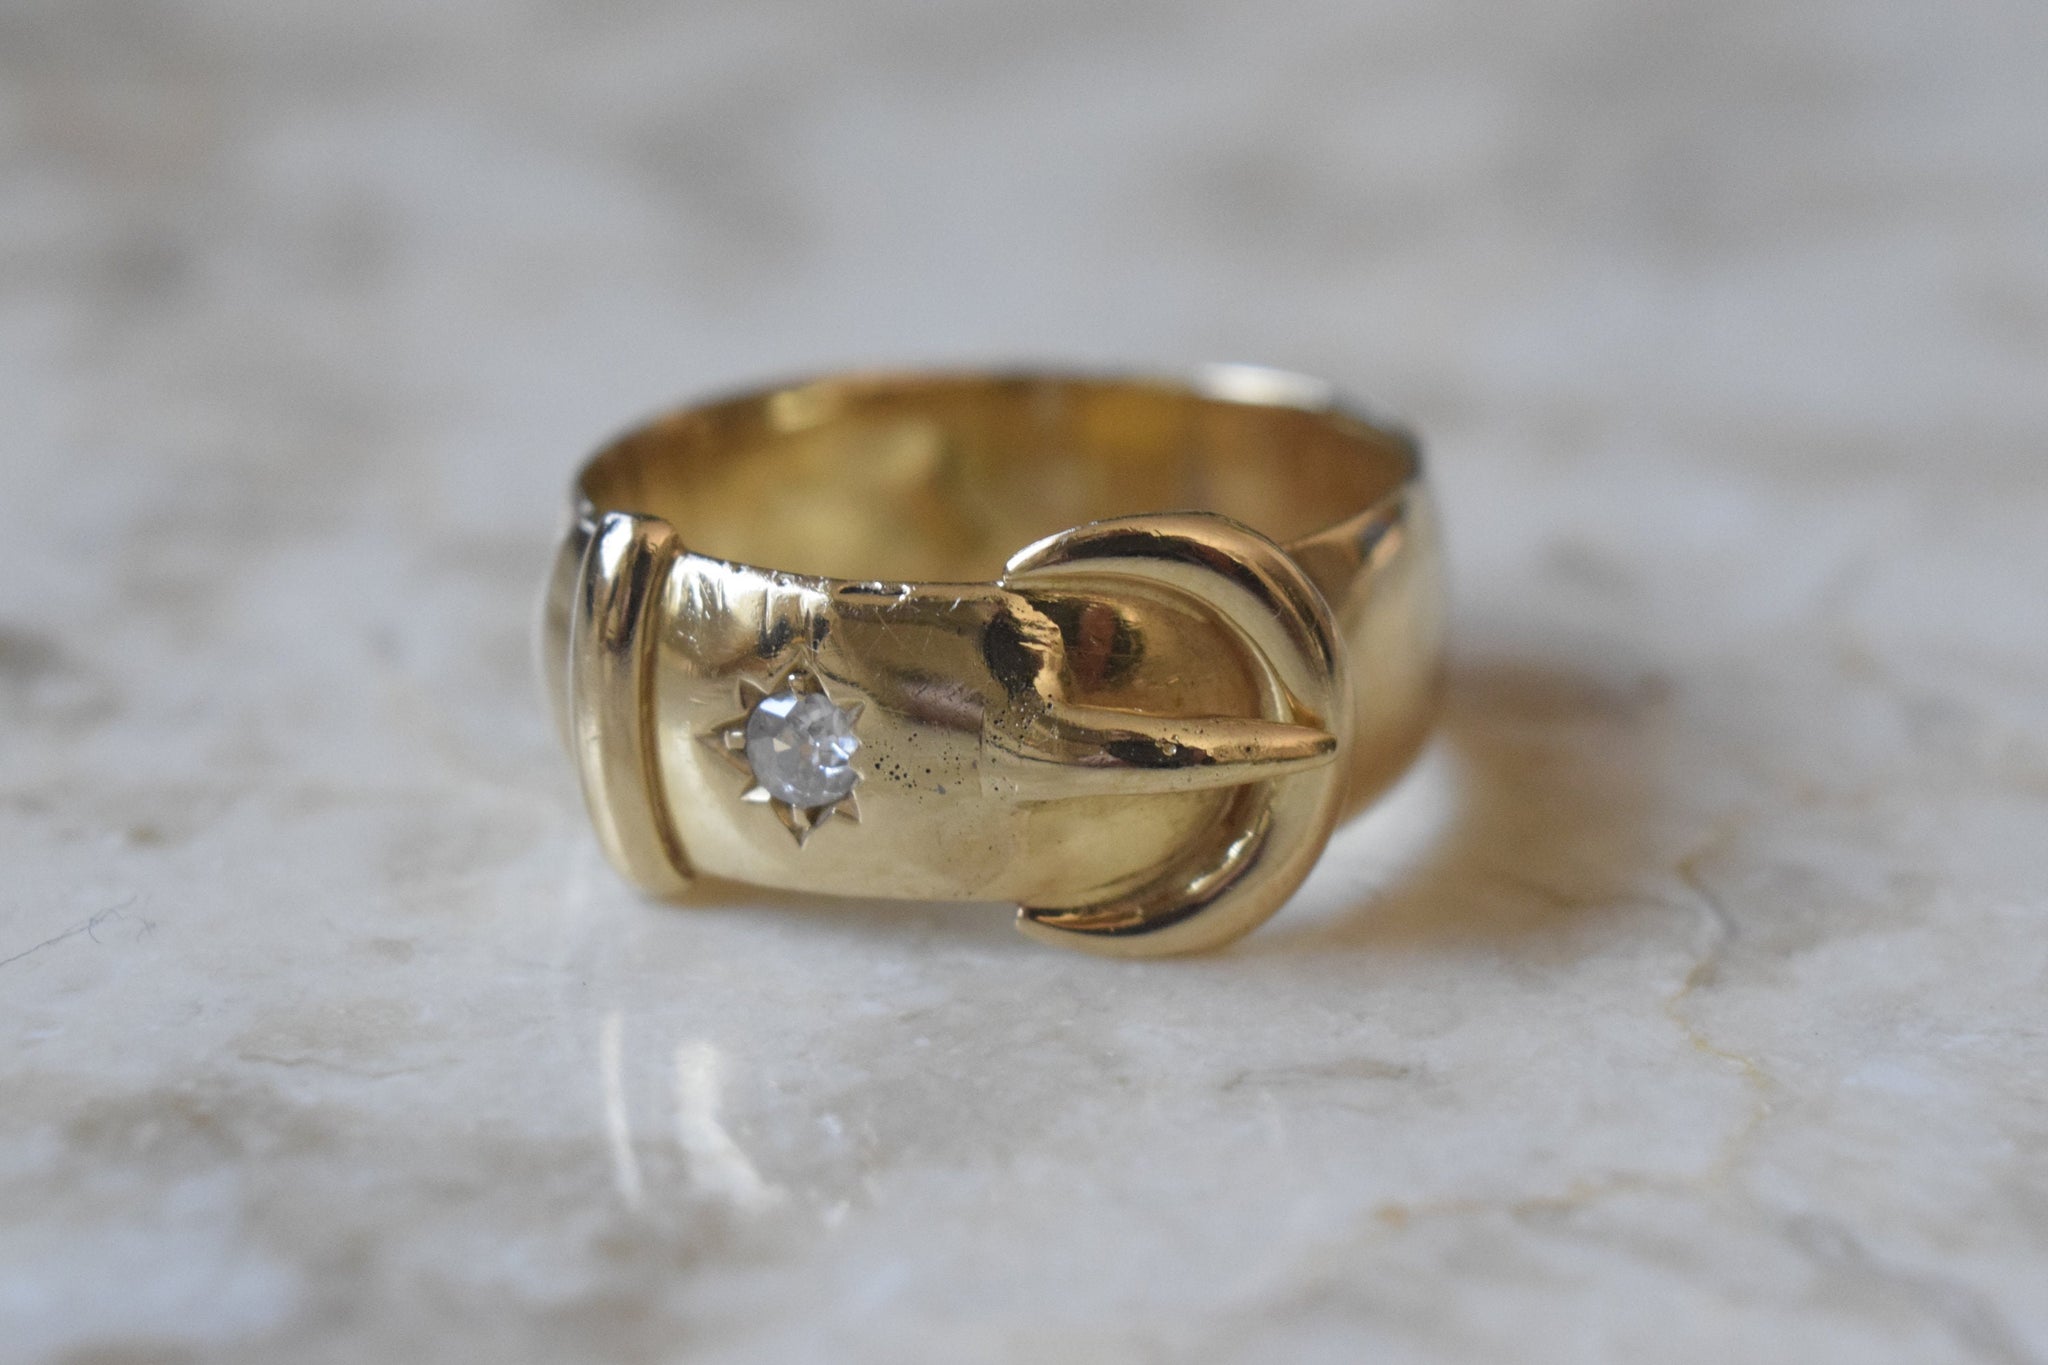 Elmwoods Auctions | AN ANTIQUE EDWARDIAN DIAMOND SNAKE RING, 1909 in 1